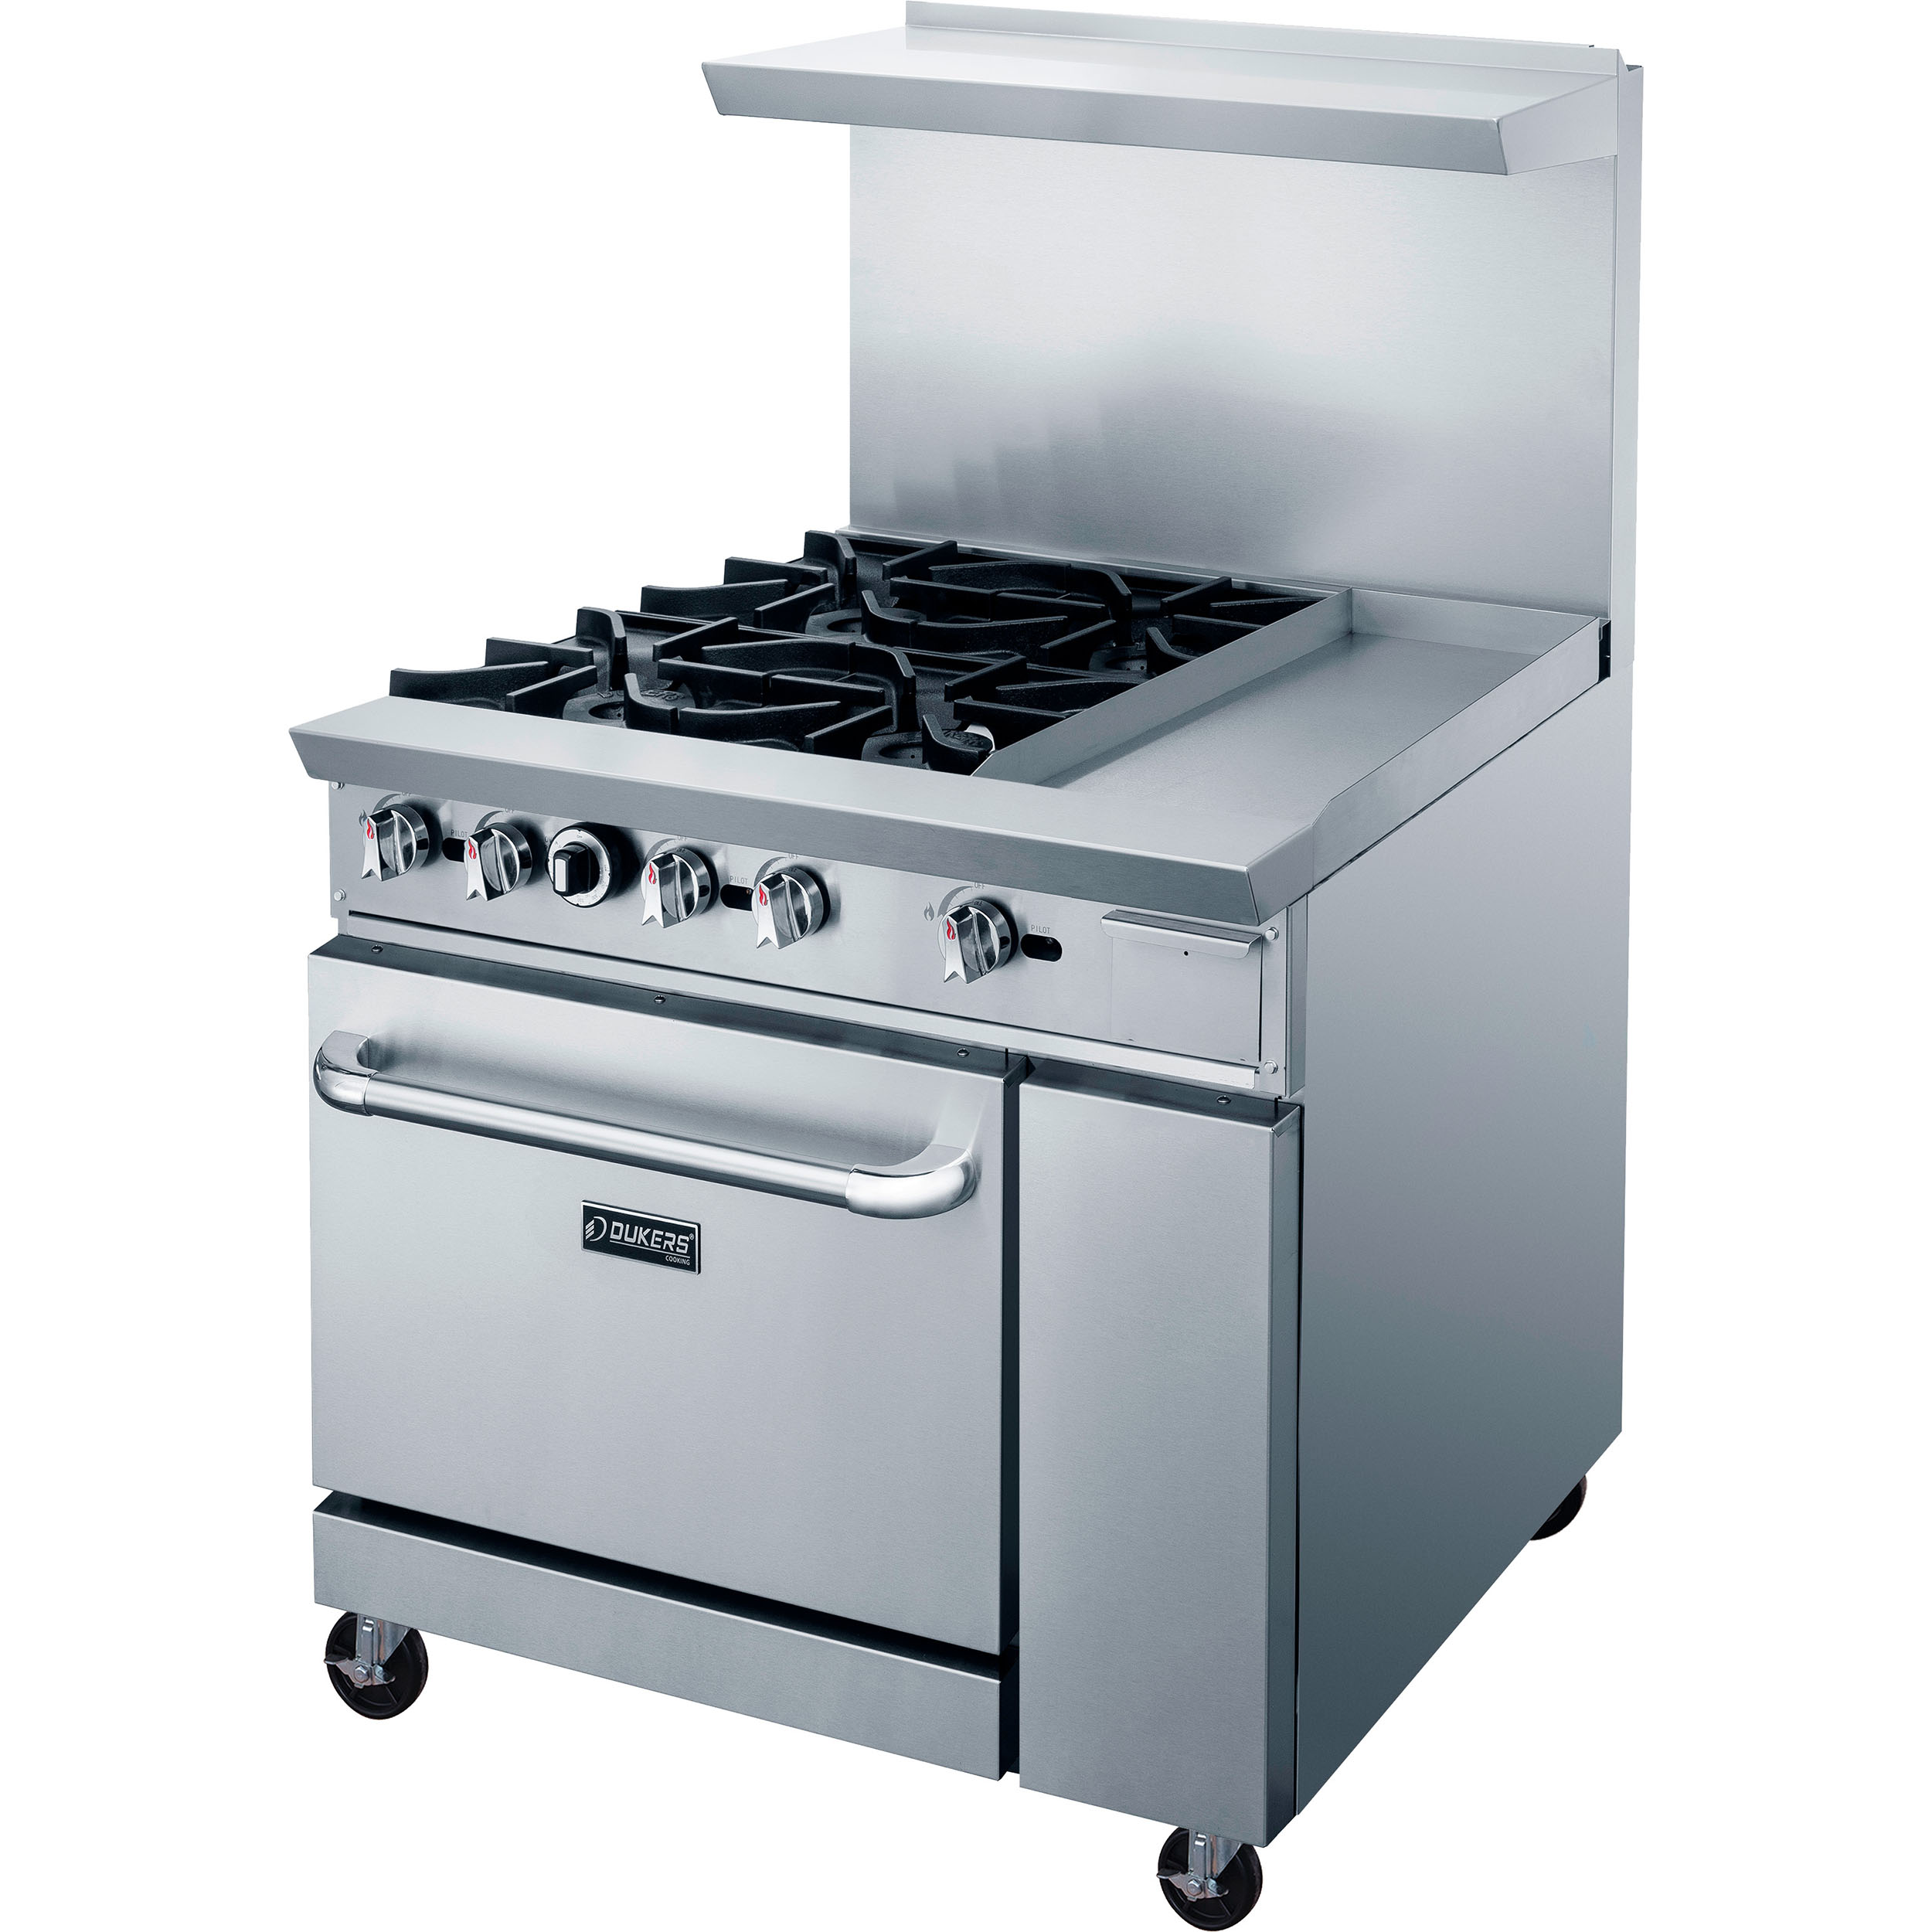 Atosa ATO-4B12G 36 Gas Range. Open Burners and 12 Griddle on the RIGHT with One 26 1/2 Wide Oven 4 